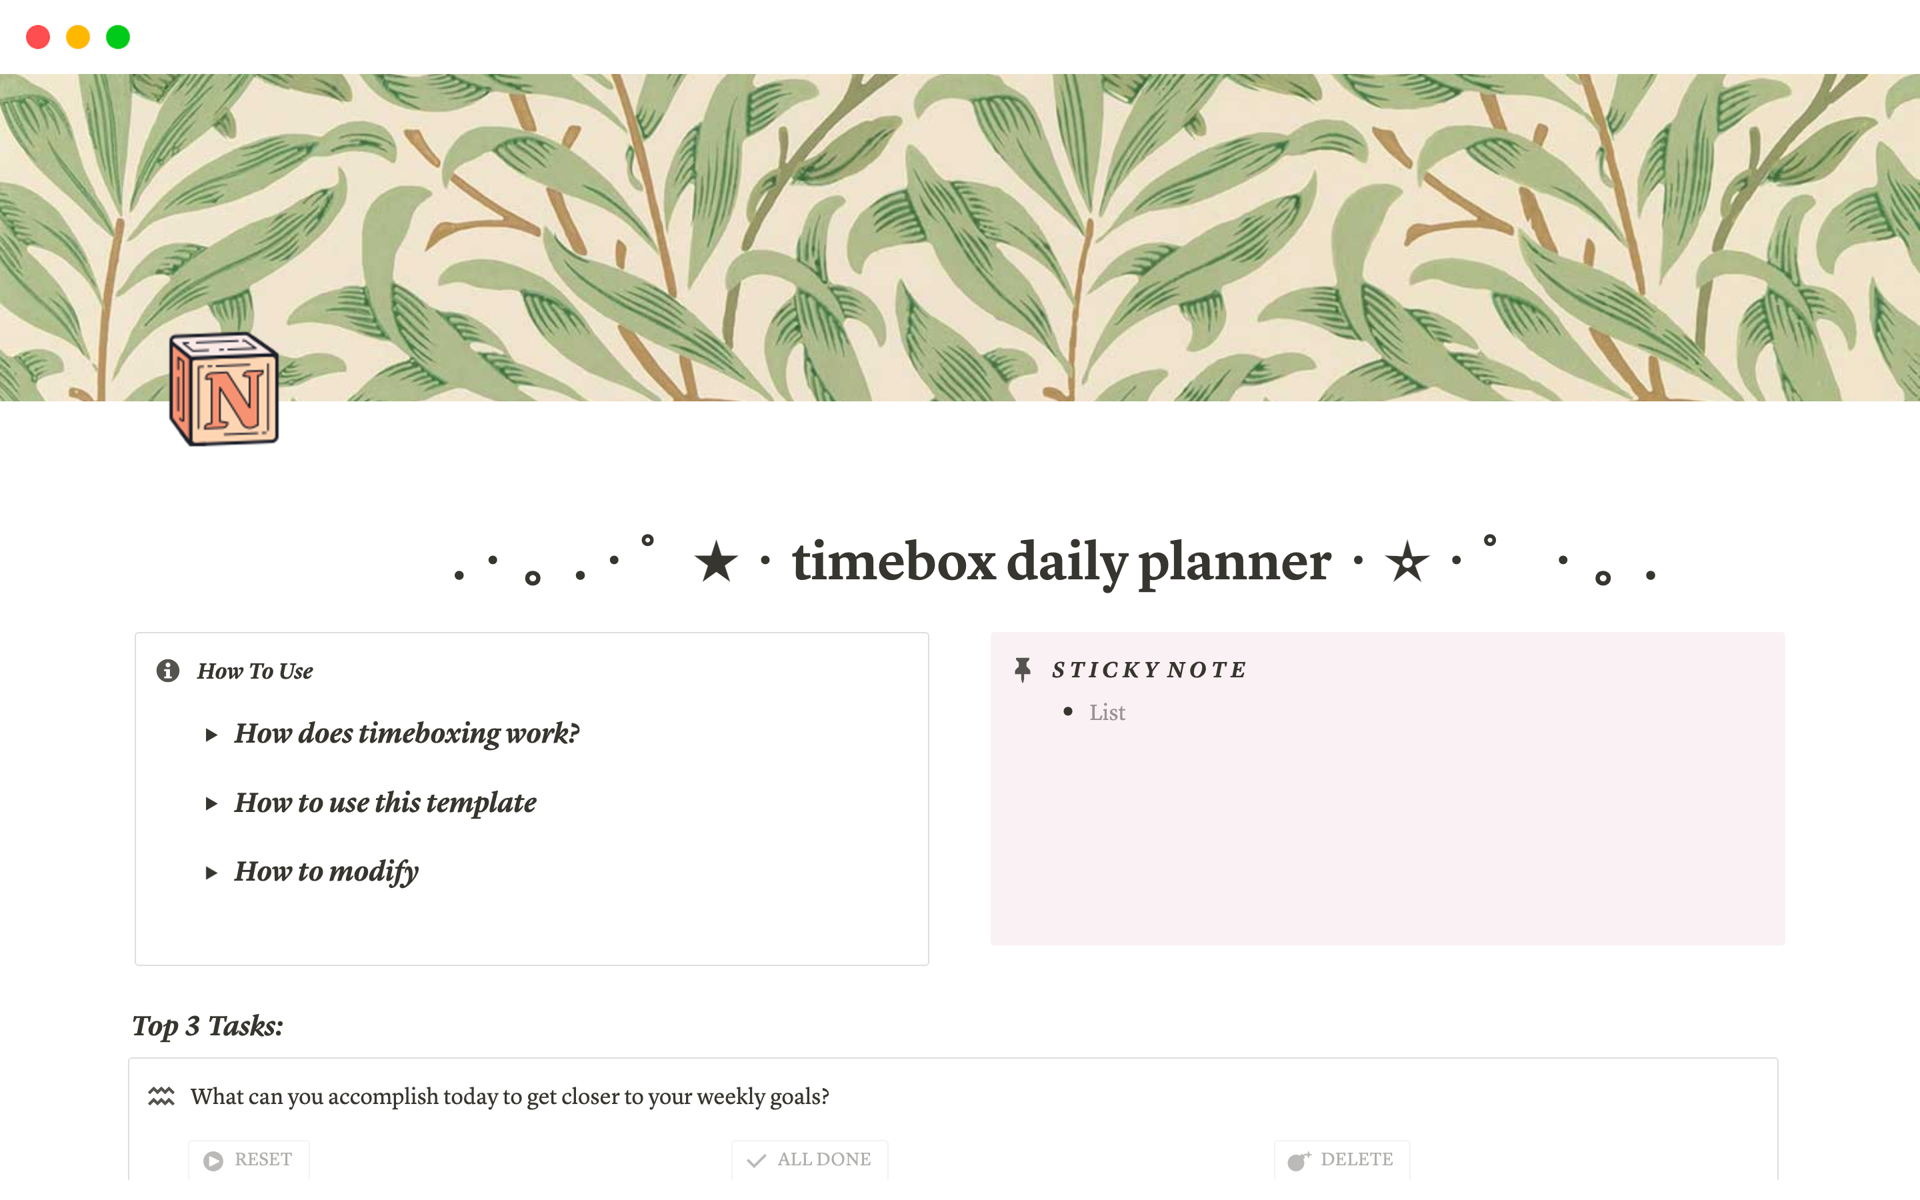 Daily Timebox Template allows users to use the Harvard-approved method of timeboxing to plan their day effectively and maximise productivity. 